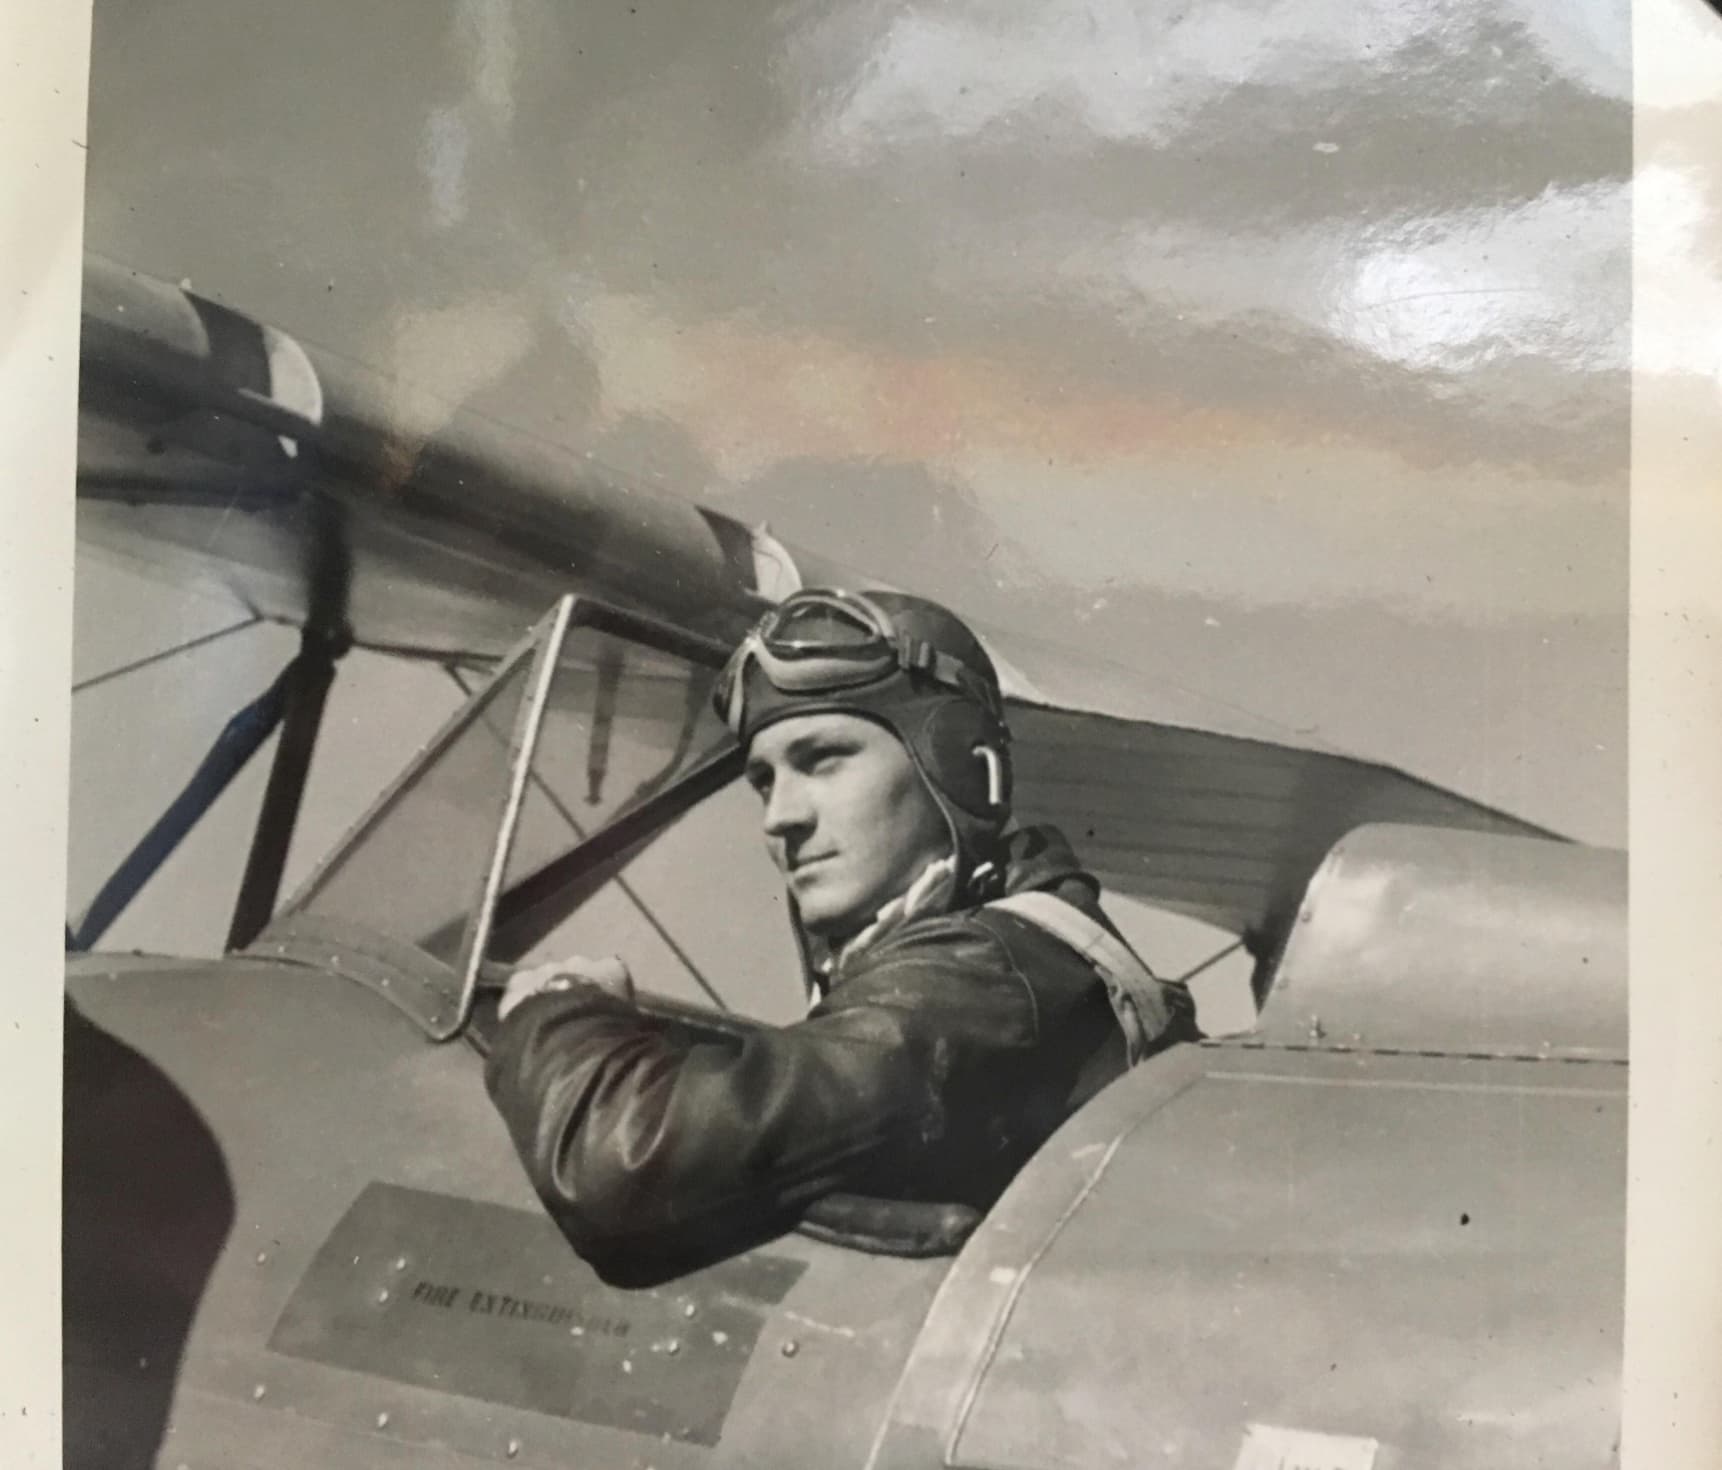 “My grandfather circa 1930s beginning a line of three generations of career aviators. I'm continuing the tradition as a UH60M pilot.”